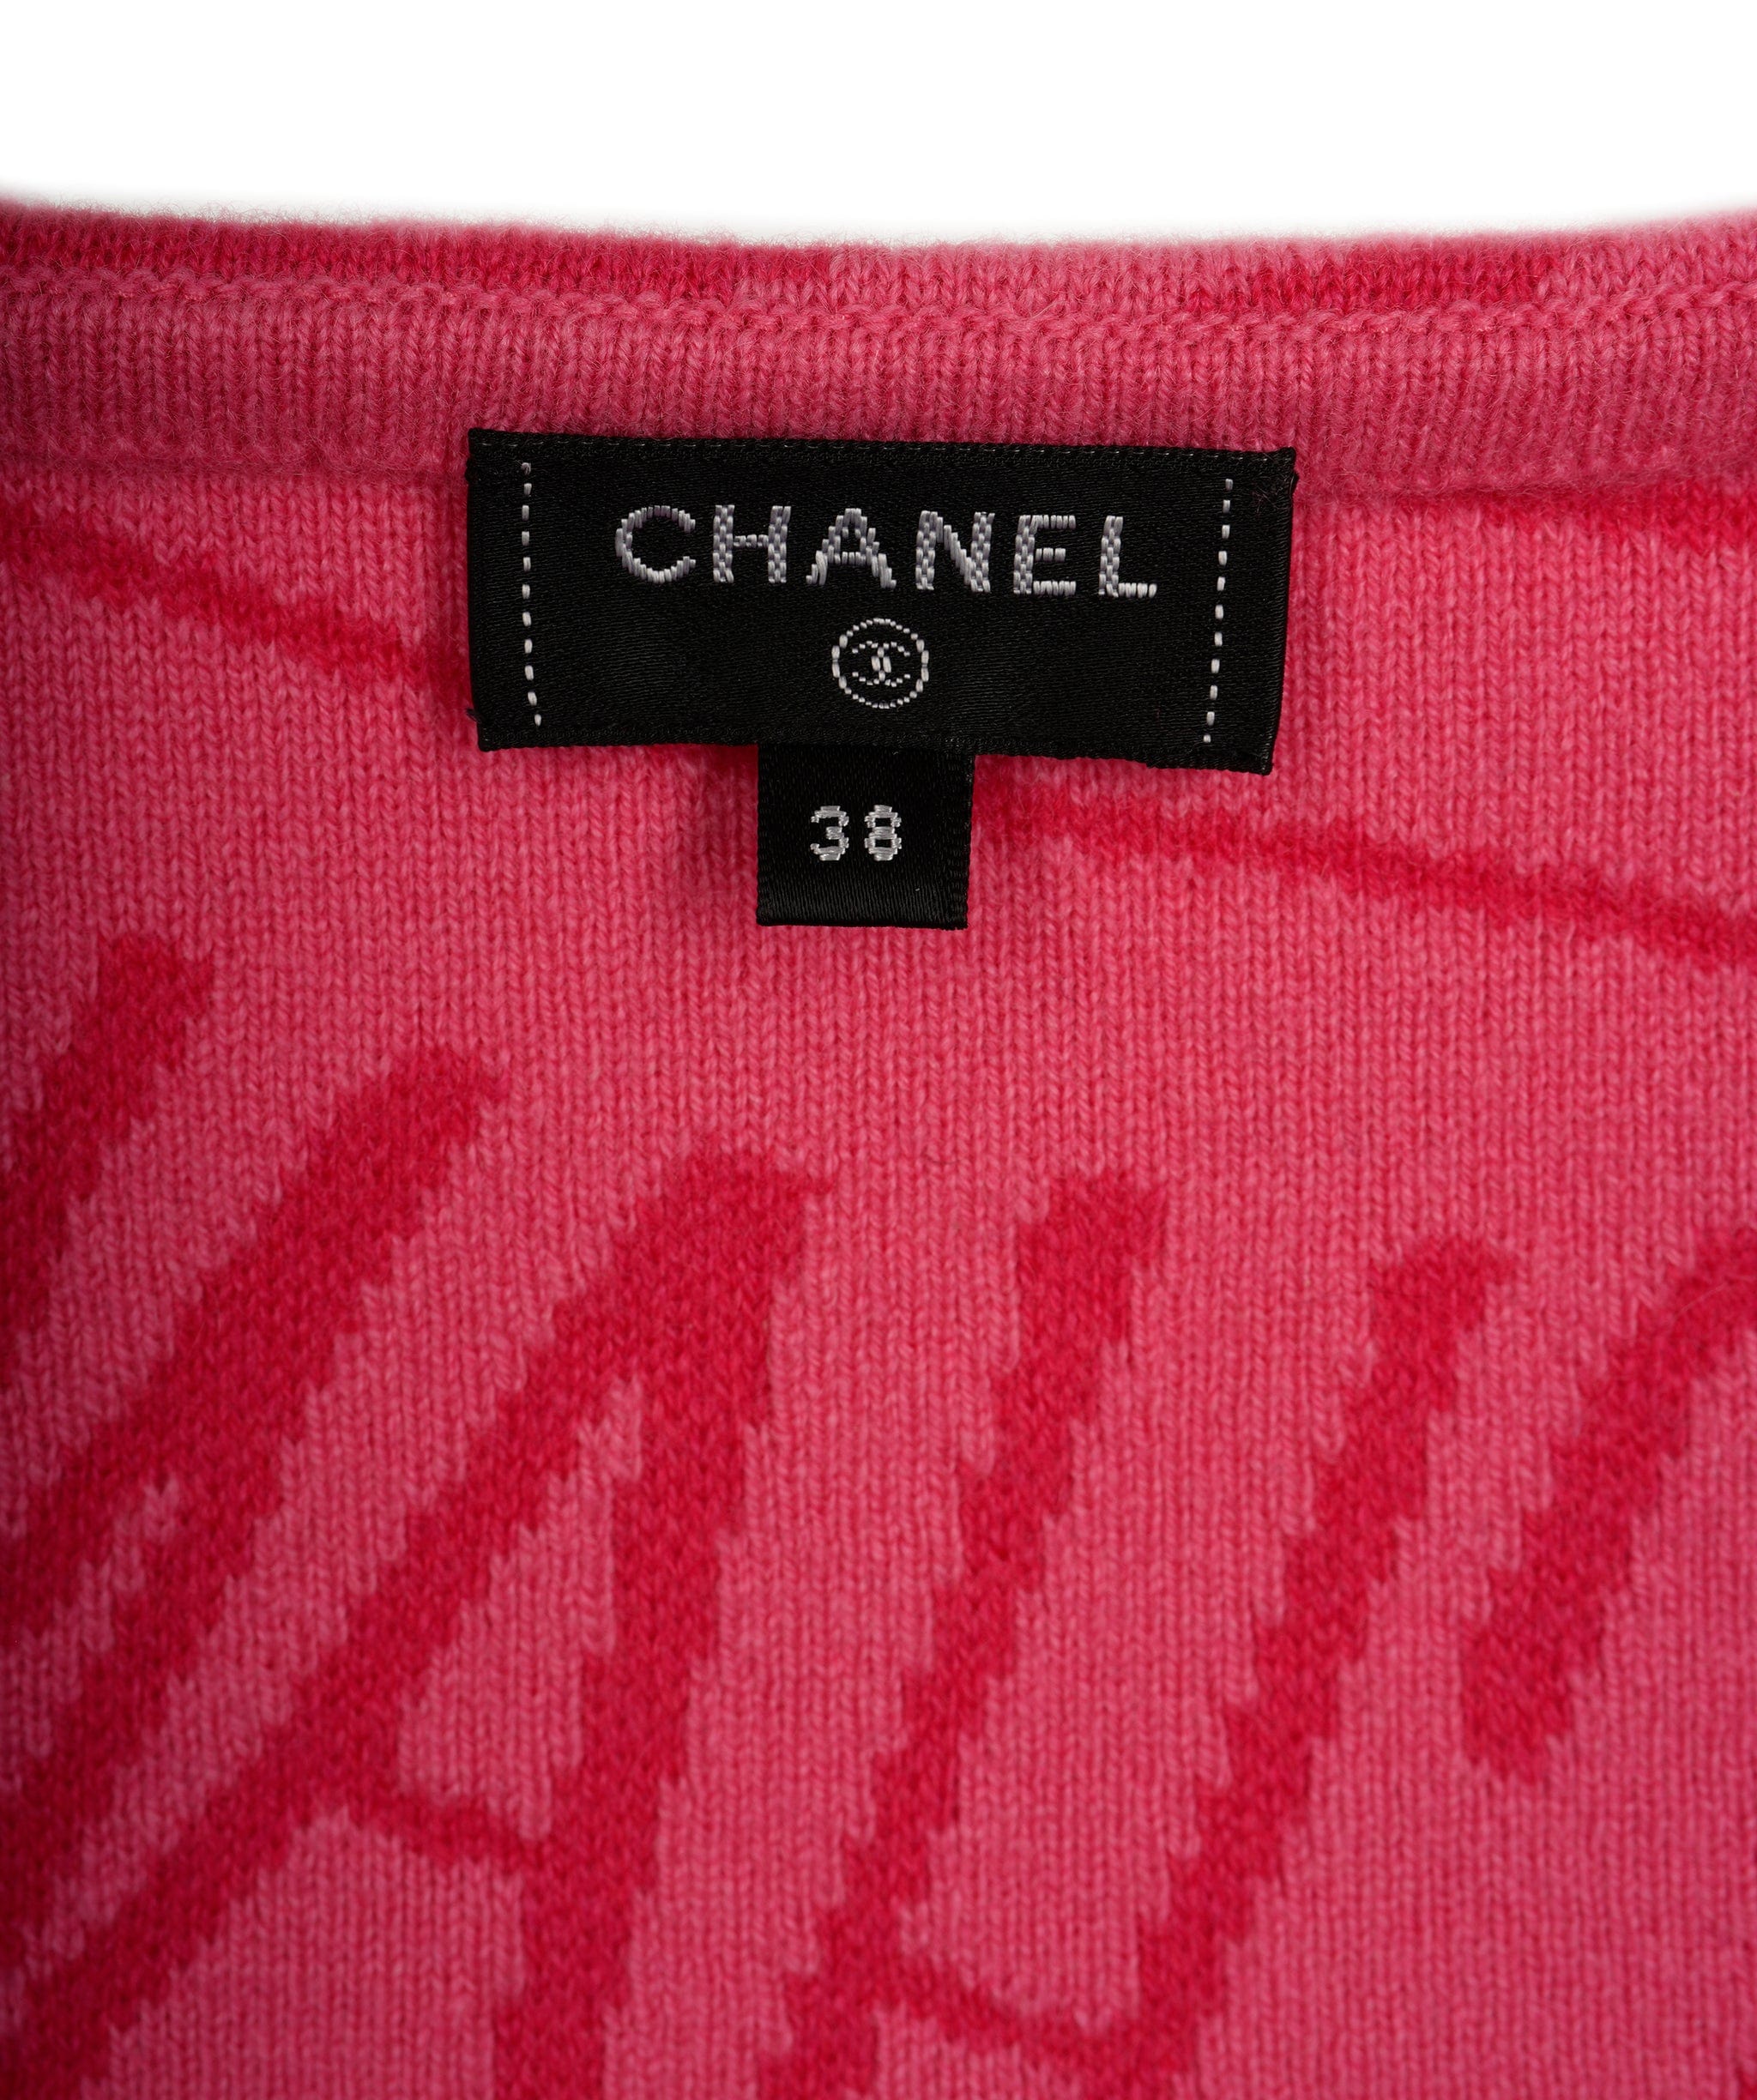 Chanel Chanel Set cachemere red and pink Jogging FR36  and Top FR38 AVC1325